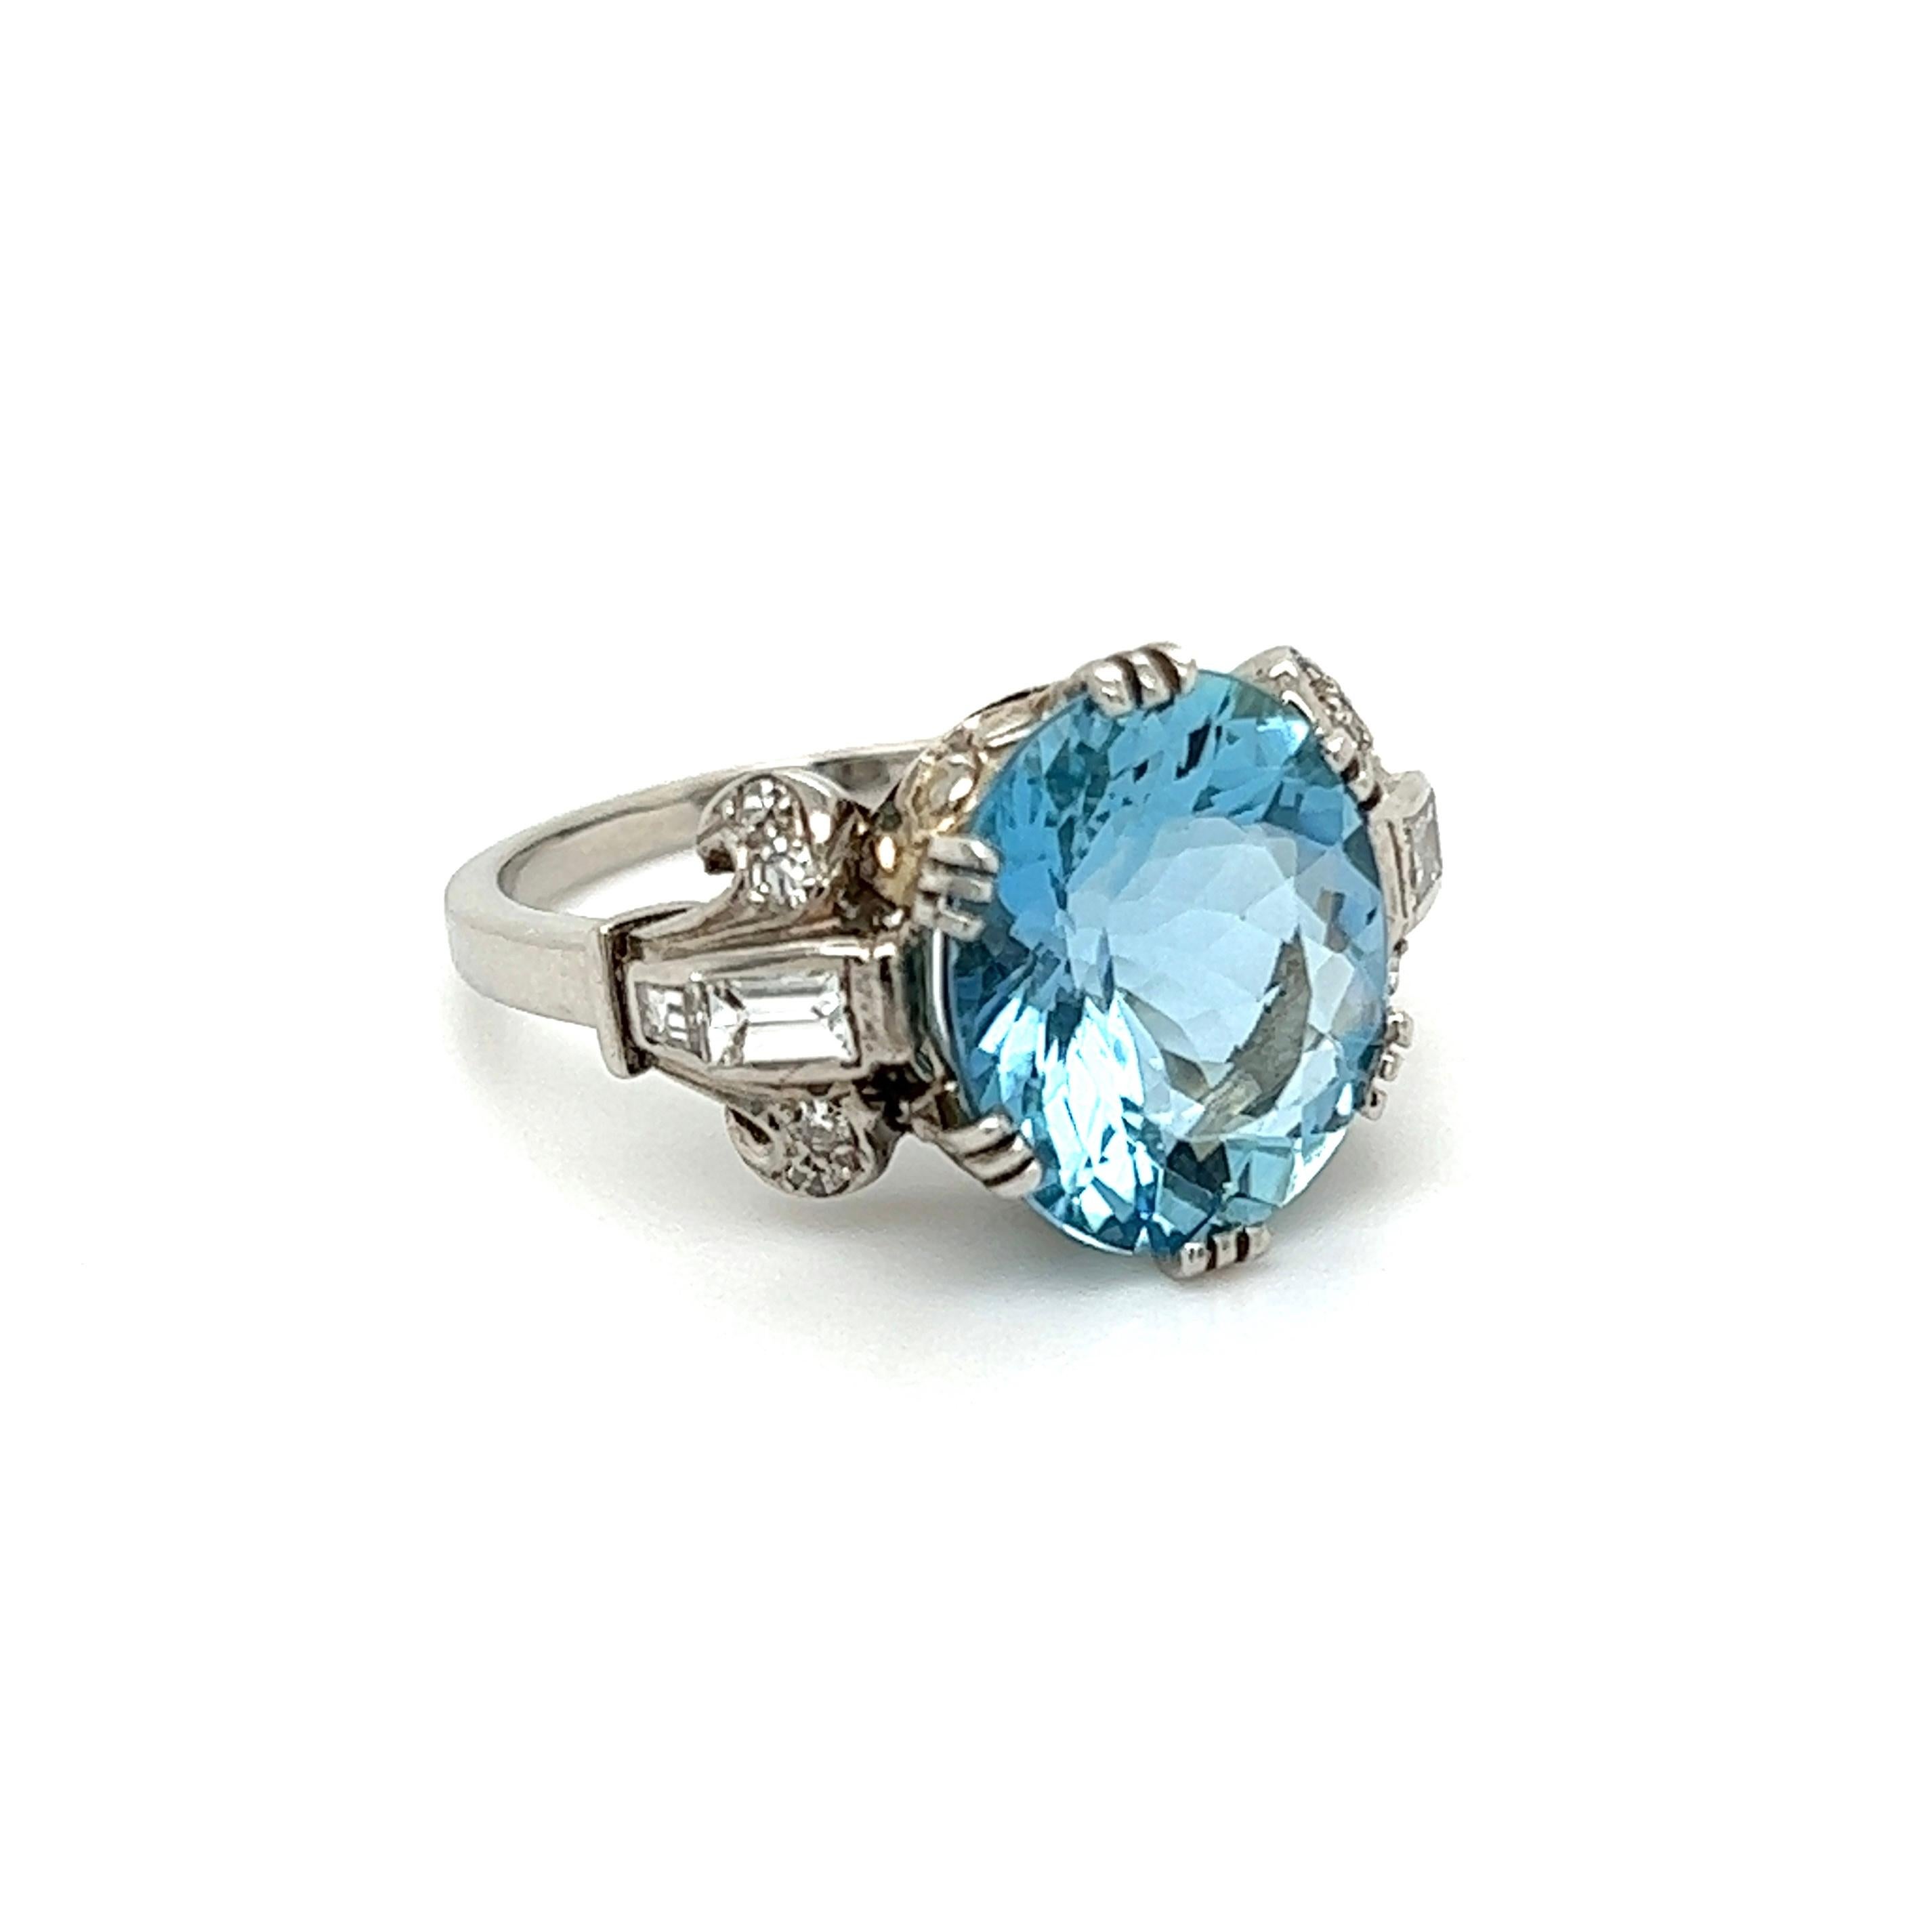 Simply Beautiful! Finely detailed Aquamarine and Diamond Gold Late Art Deco Cocktail Ring. Centering a securely nestled Hand set Oval Aquamarine, weighing approx. 5.50 Carats, either side set with Diamonds, approx. 0.30tcw. Approx. Dimensions: 1.00”